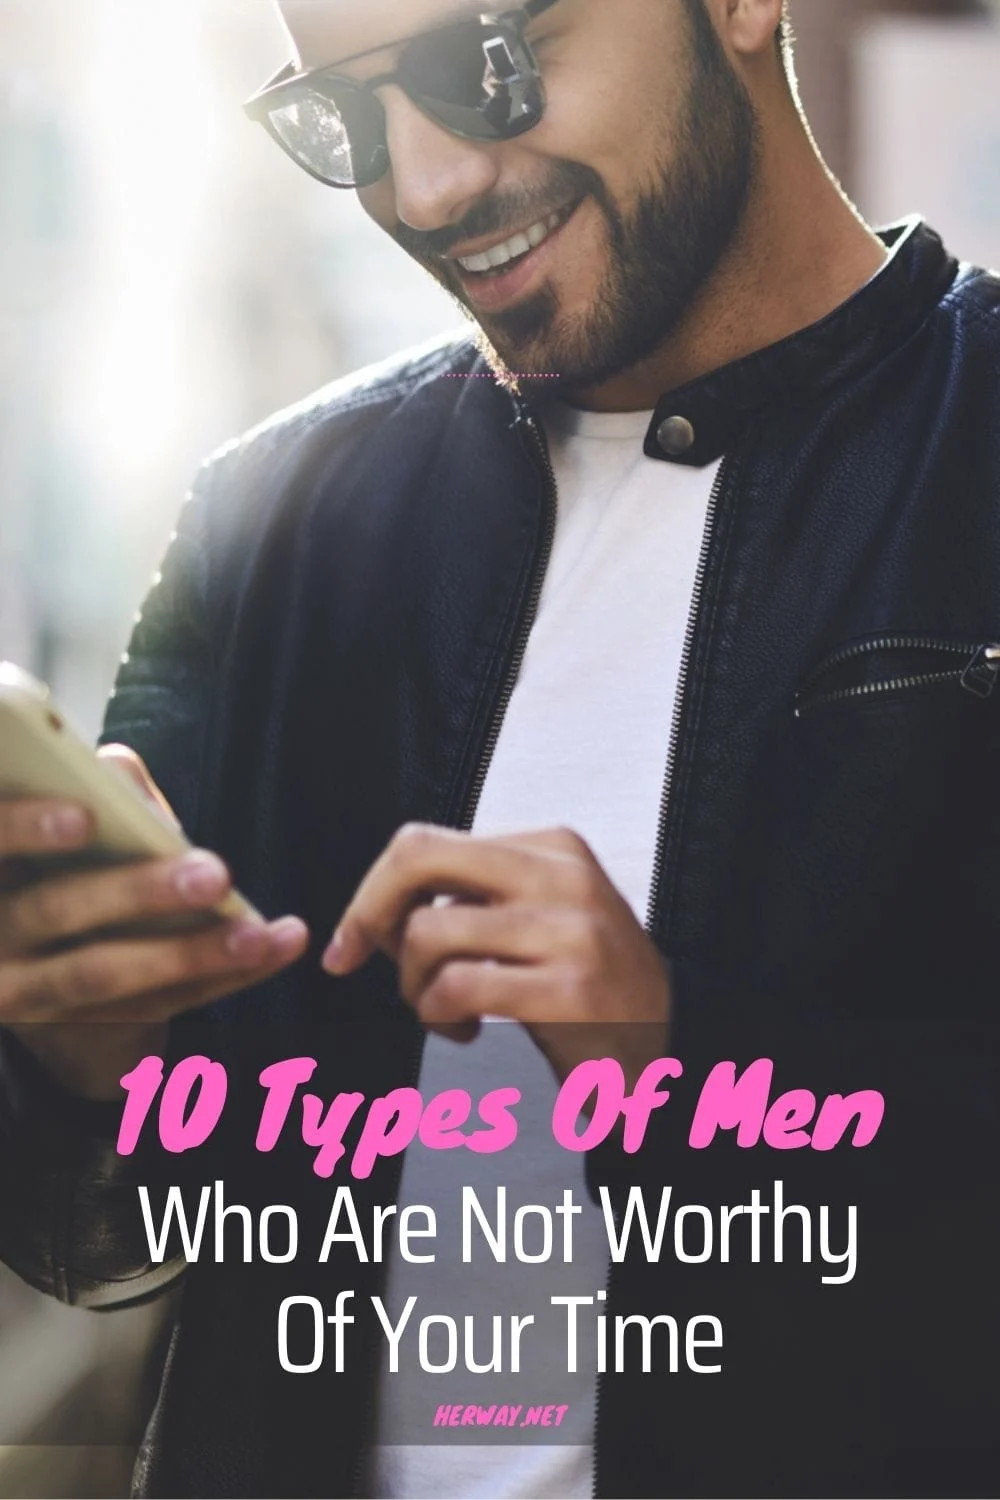 10 Types Of Men Who Are Not Worthy Of Your Time